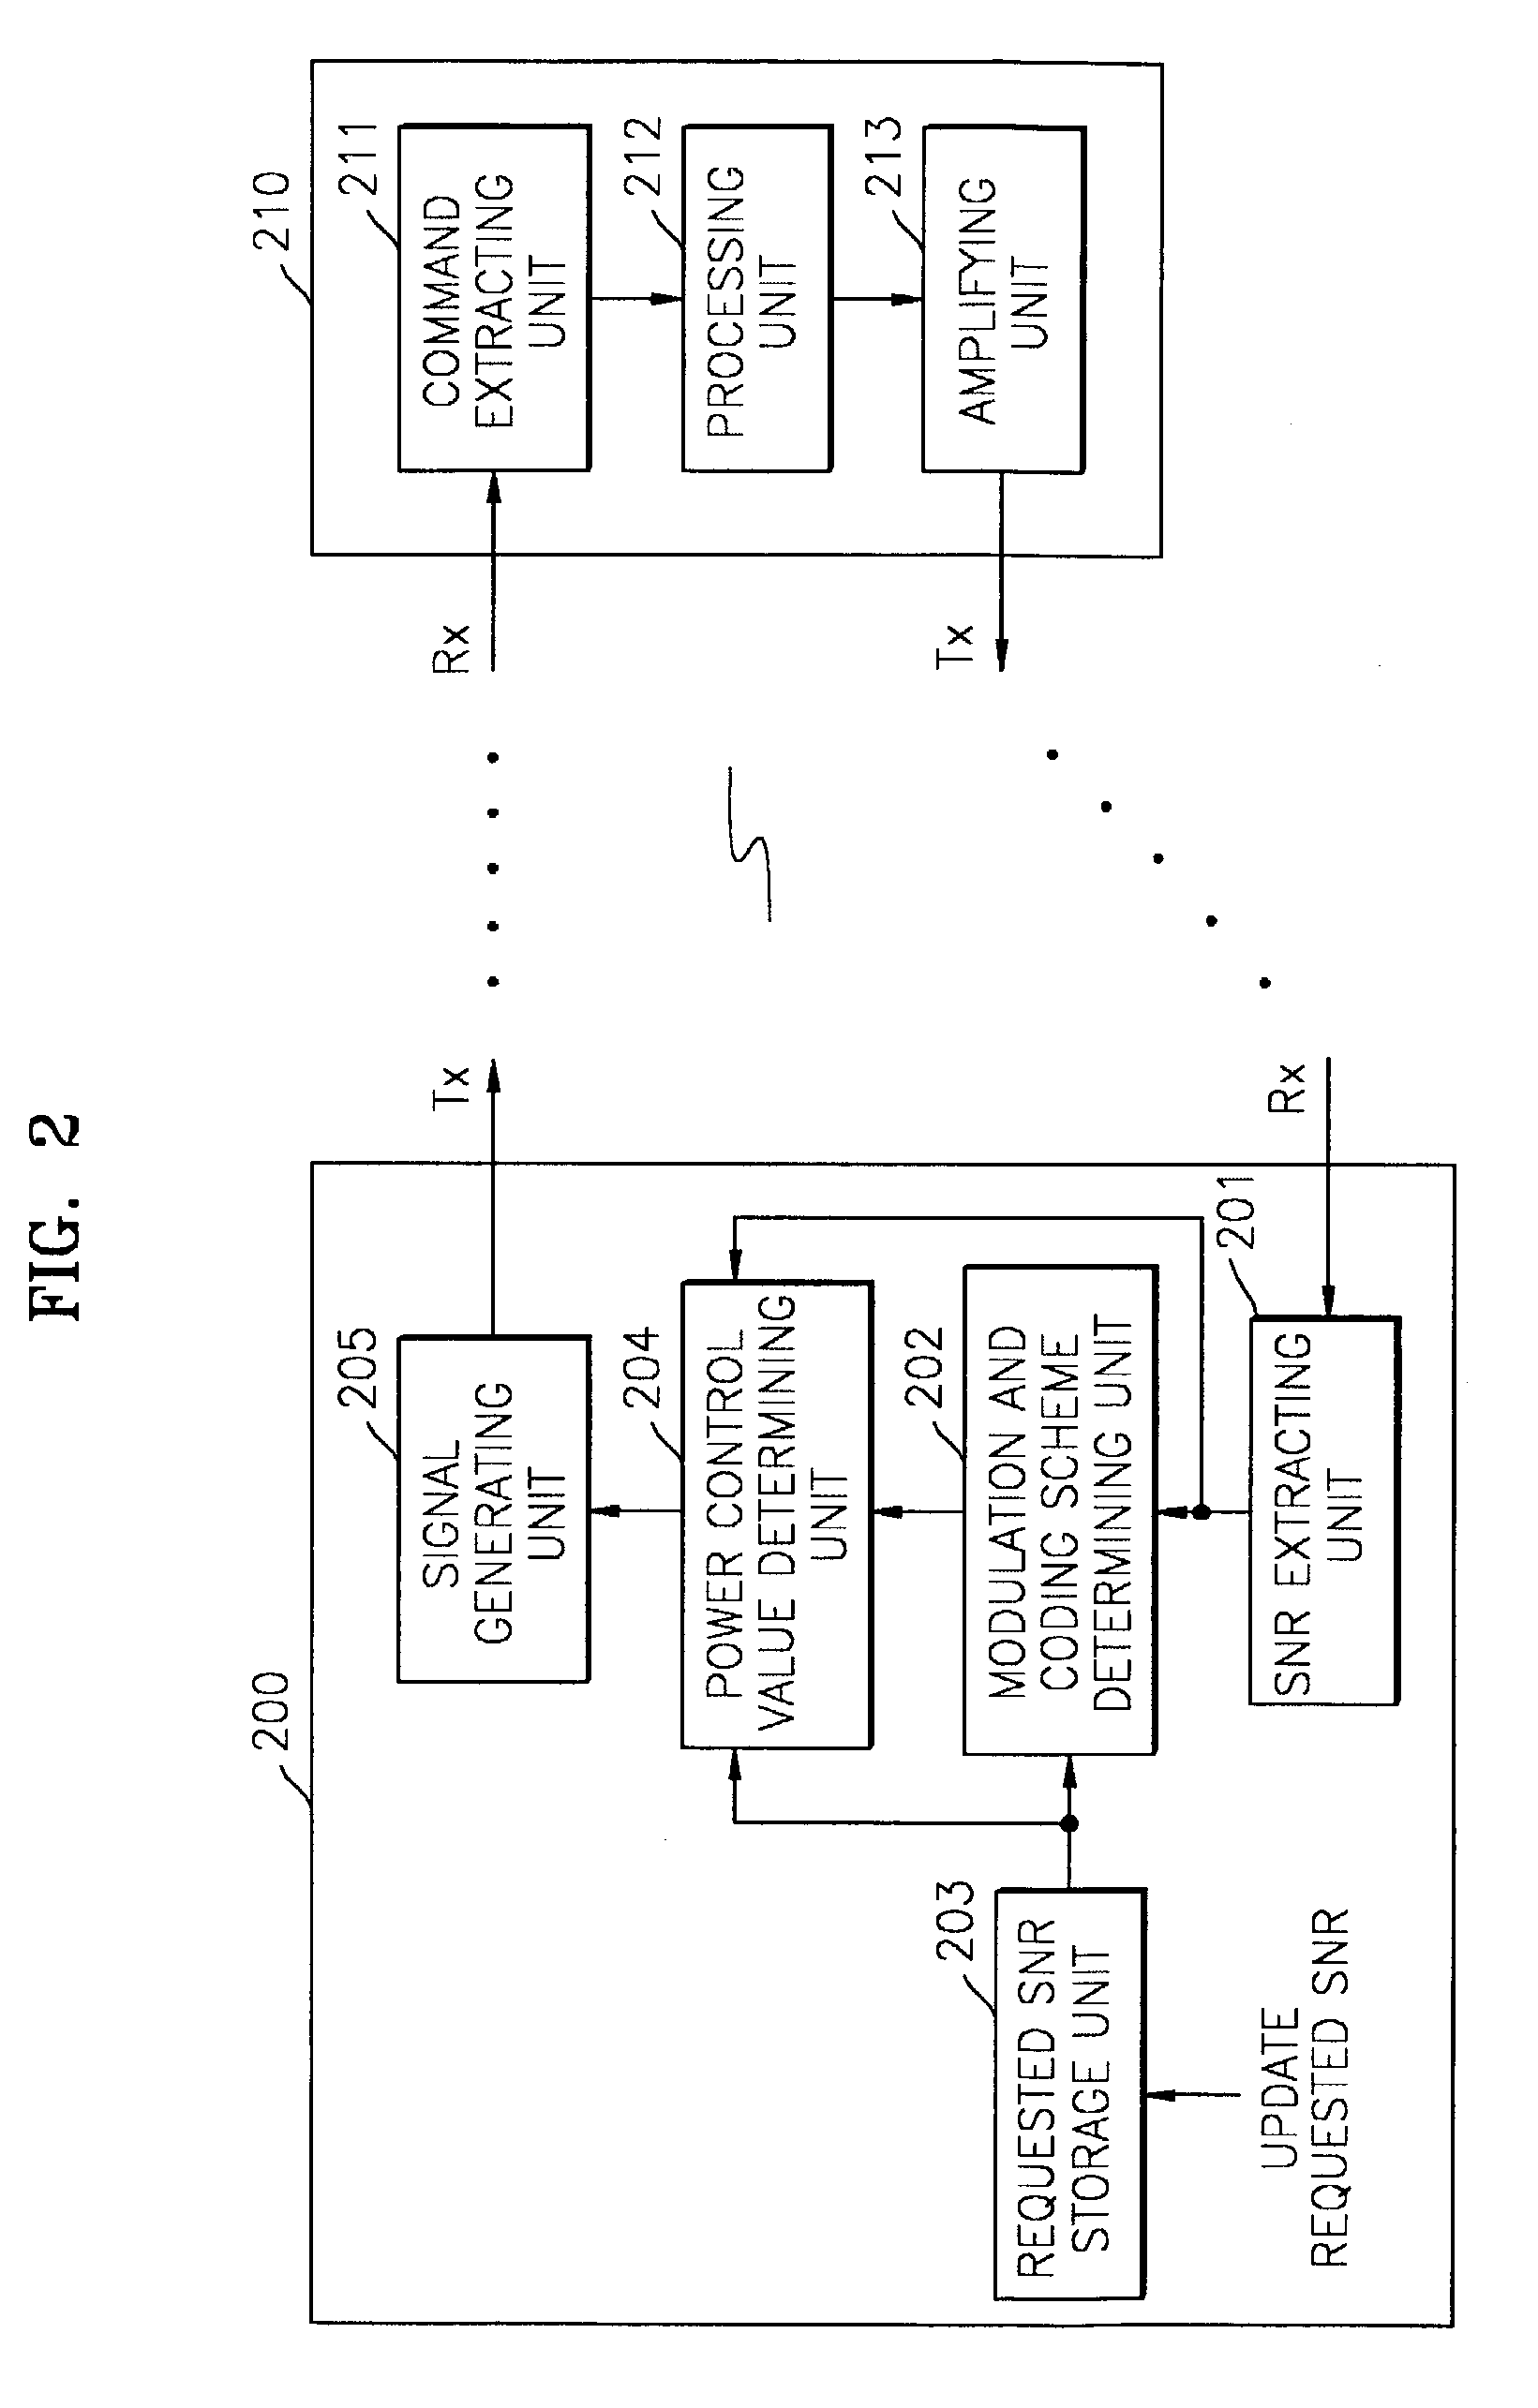 Power controllable wireless mobile communications system of adaptive modulation and coding scheme and method therefor